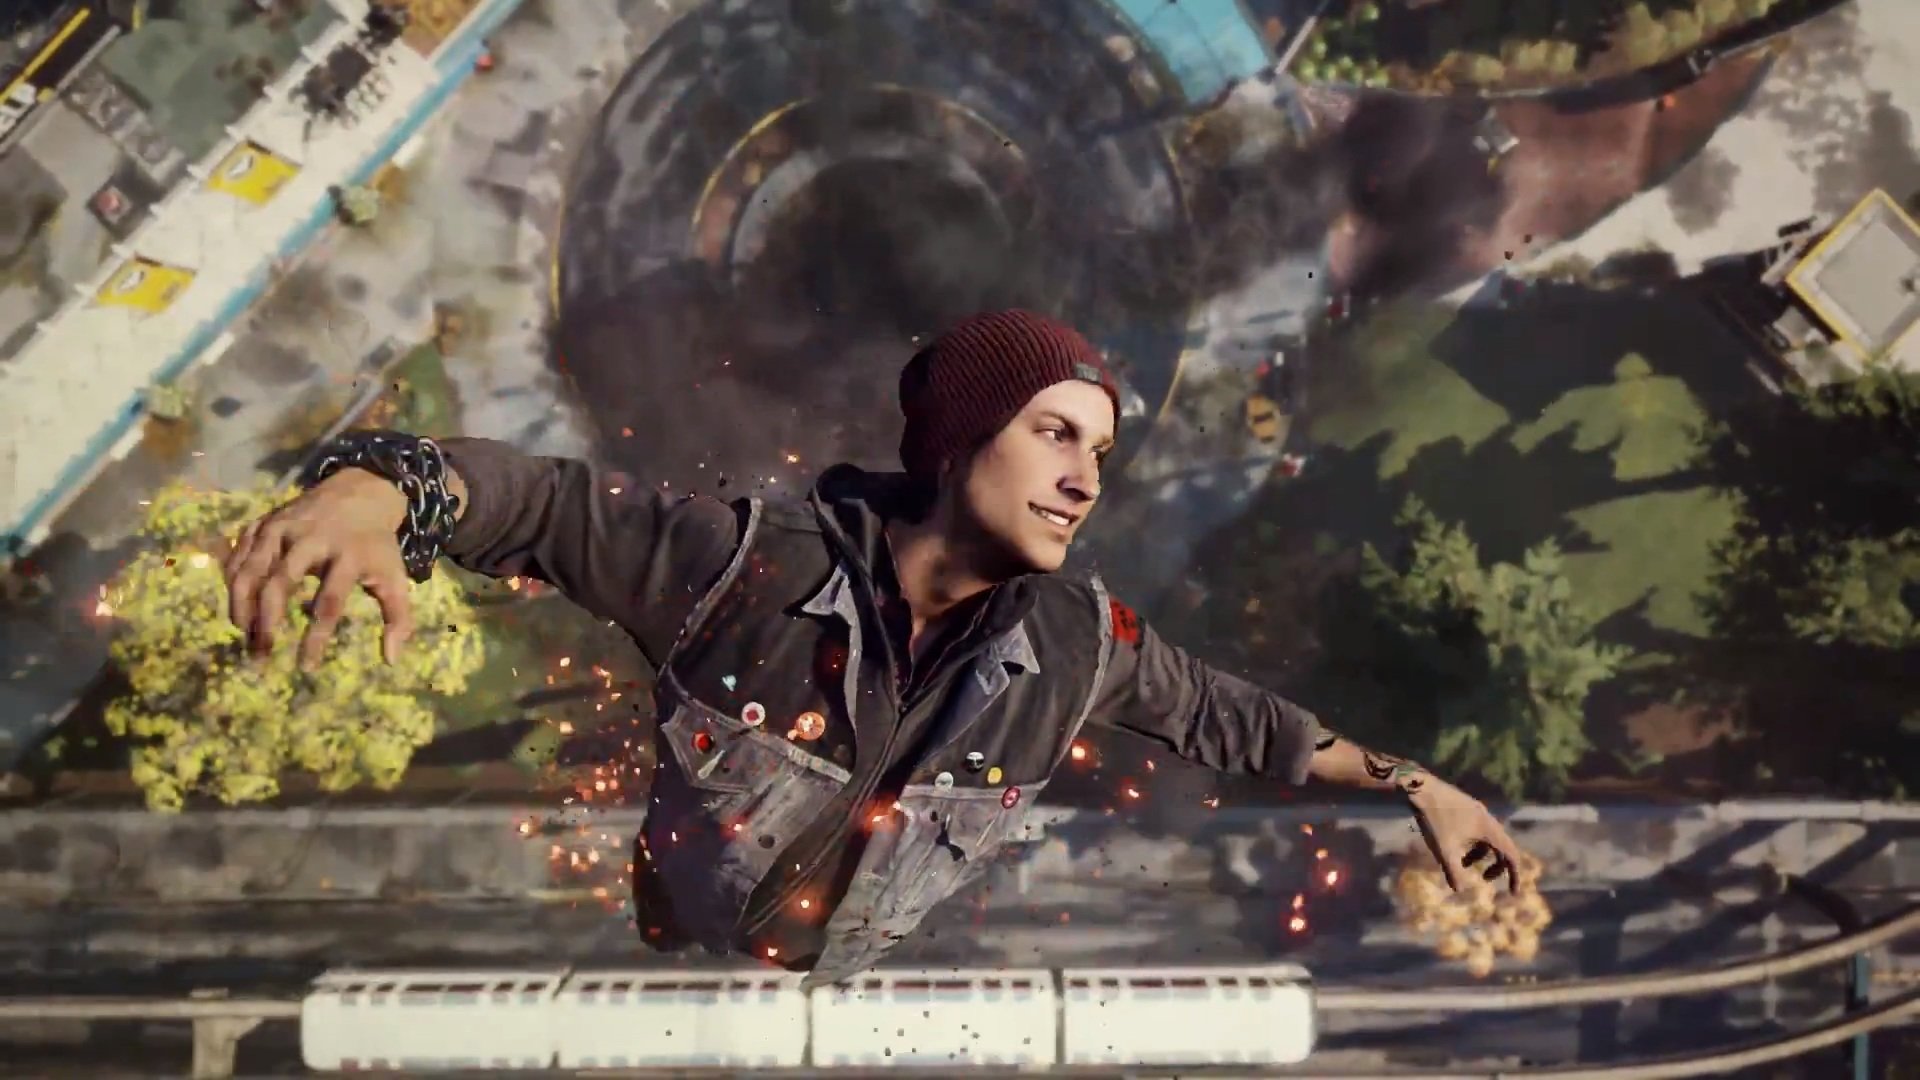 Best InFAMOUS: Second Son wallpaper ID:270121 for High Resolution full hd 1080p desktop